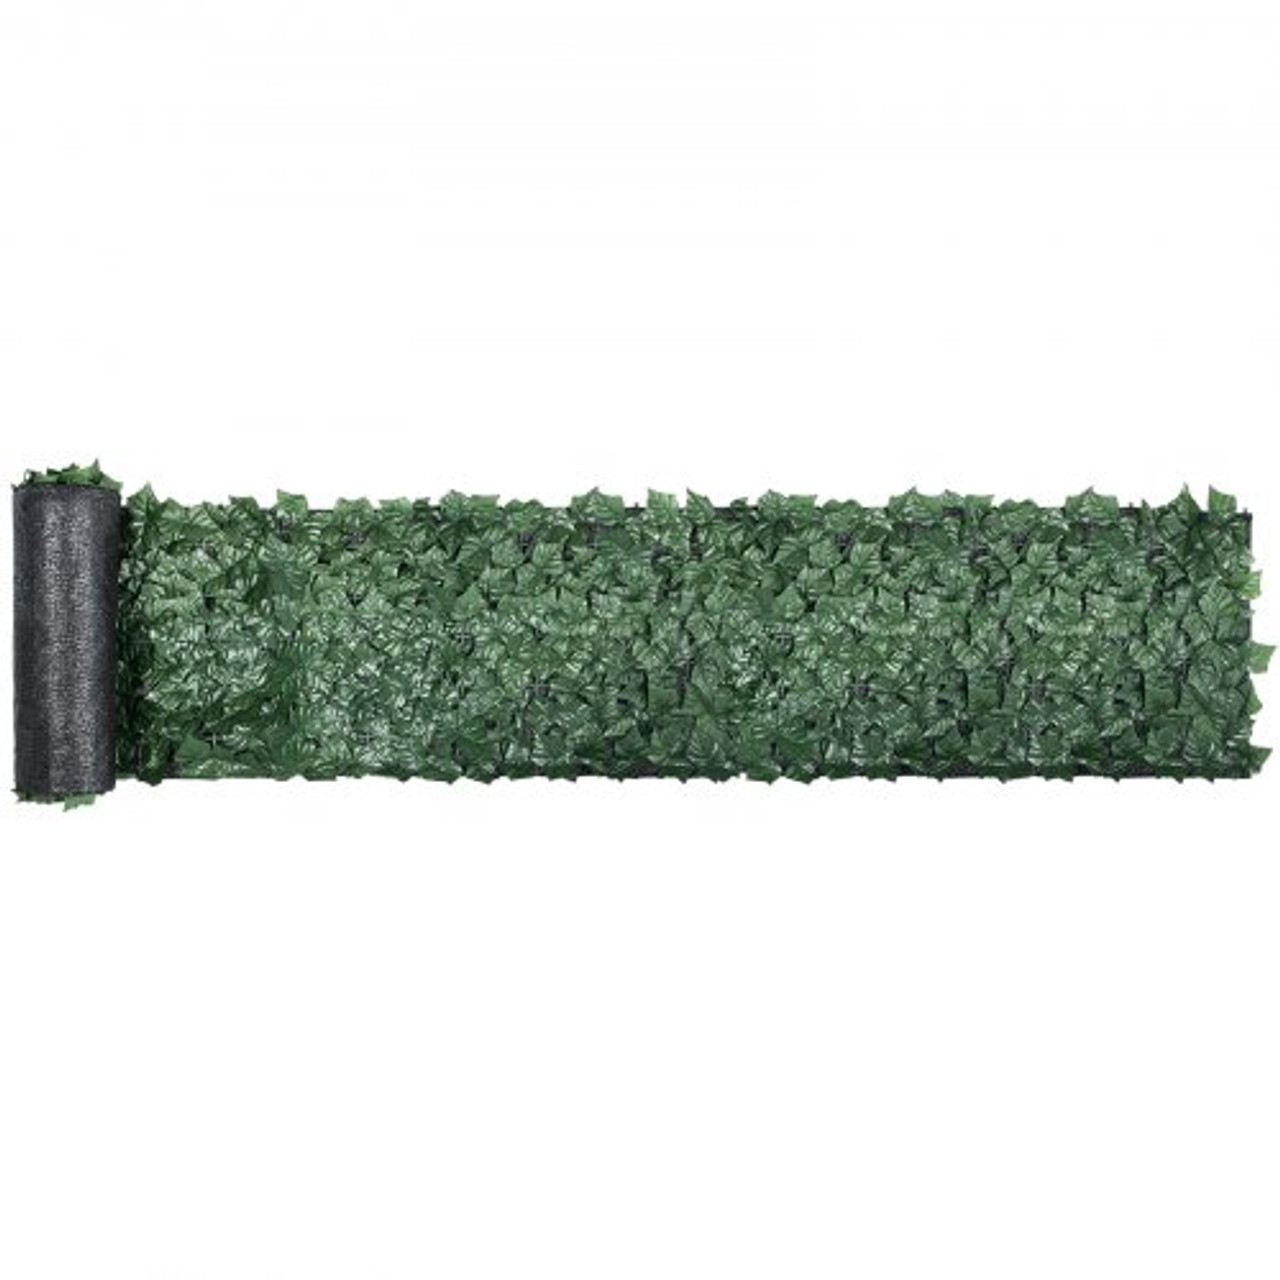 Ivy Privacy Fence Screen, 39"x178" PP Faux Leaf Artificial Hedges, 3-Layers Indoor or Outdoor Greenery Leaves Panel, Multi-use for Garden, Yard, Decor, Balcony, Patio, Home, Green, 39 x 178 Inch